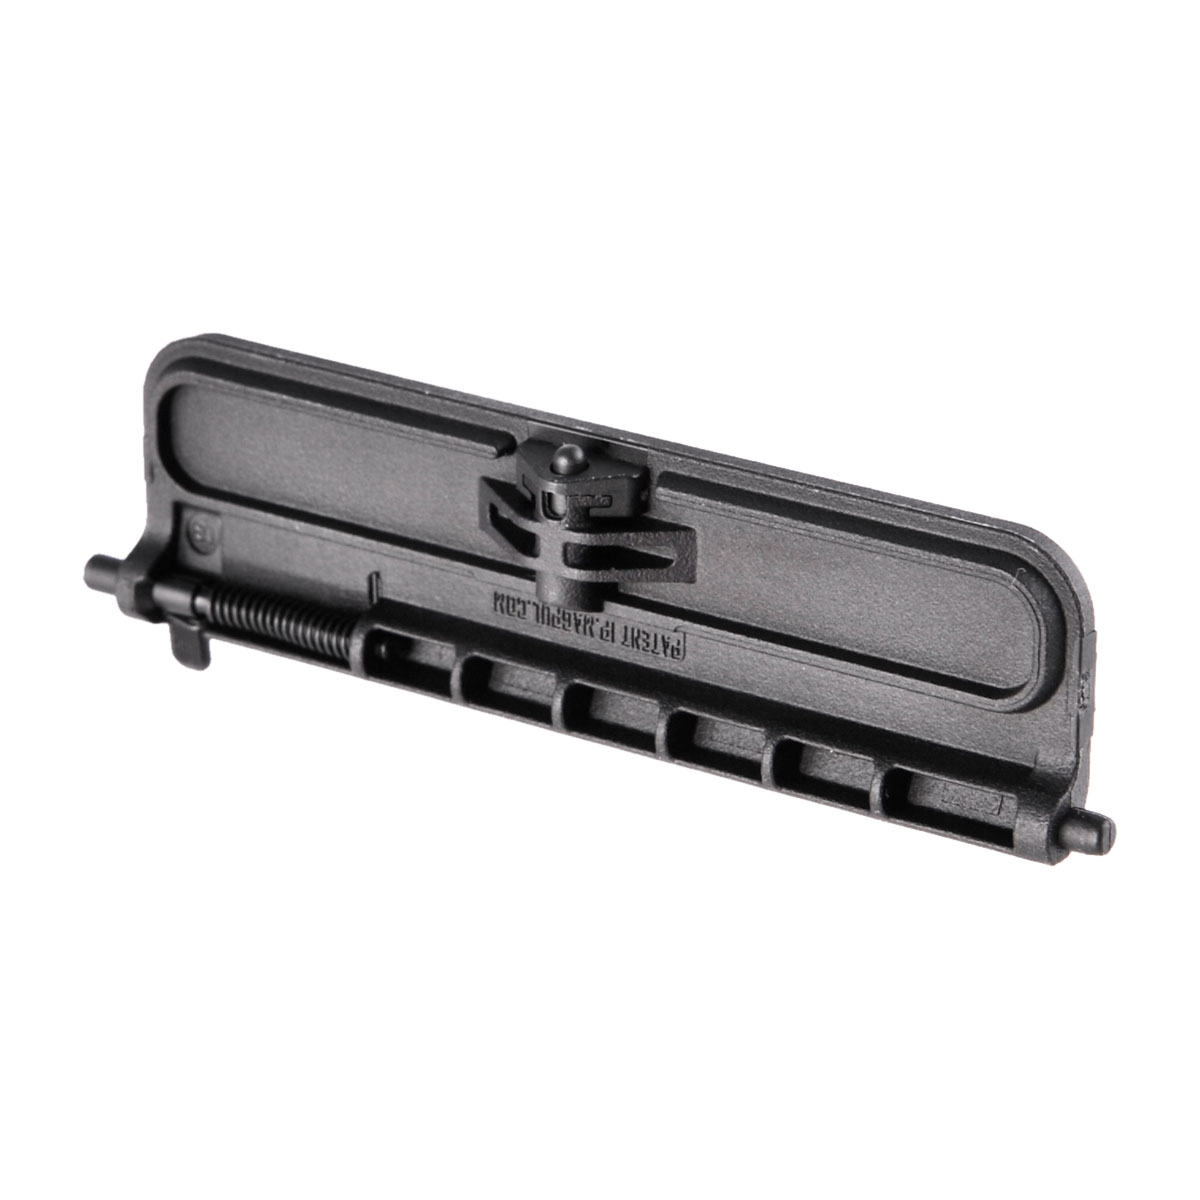 Magpul Enhanced Polymer AR-15 Ejection Port Cover (Dust Cover), FDE